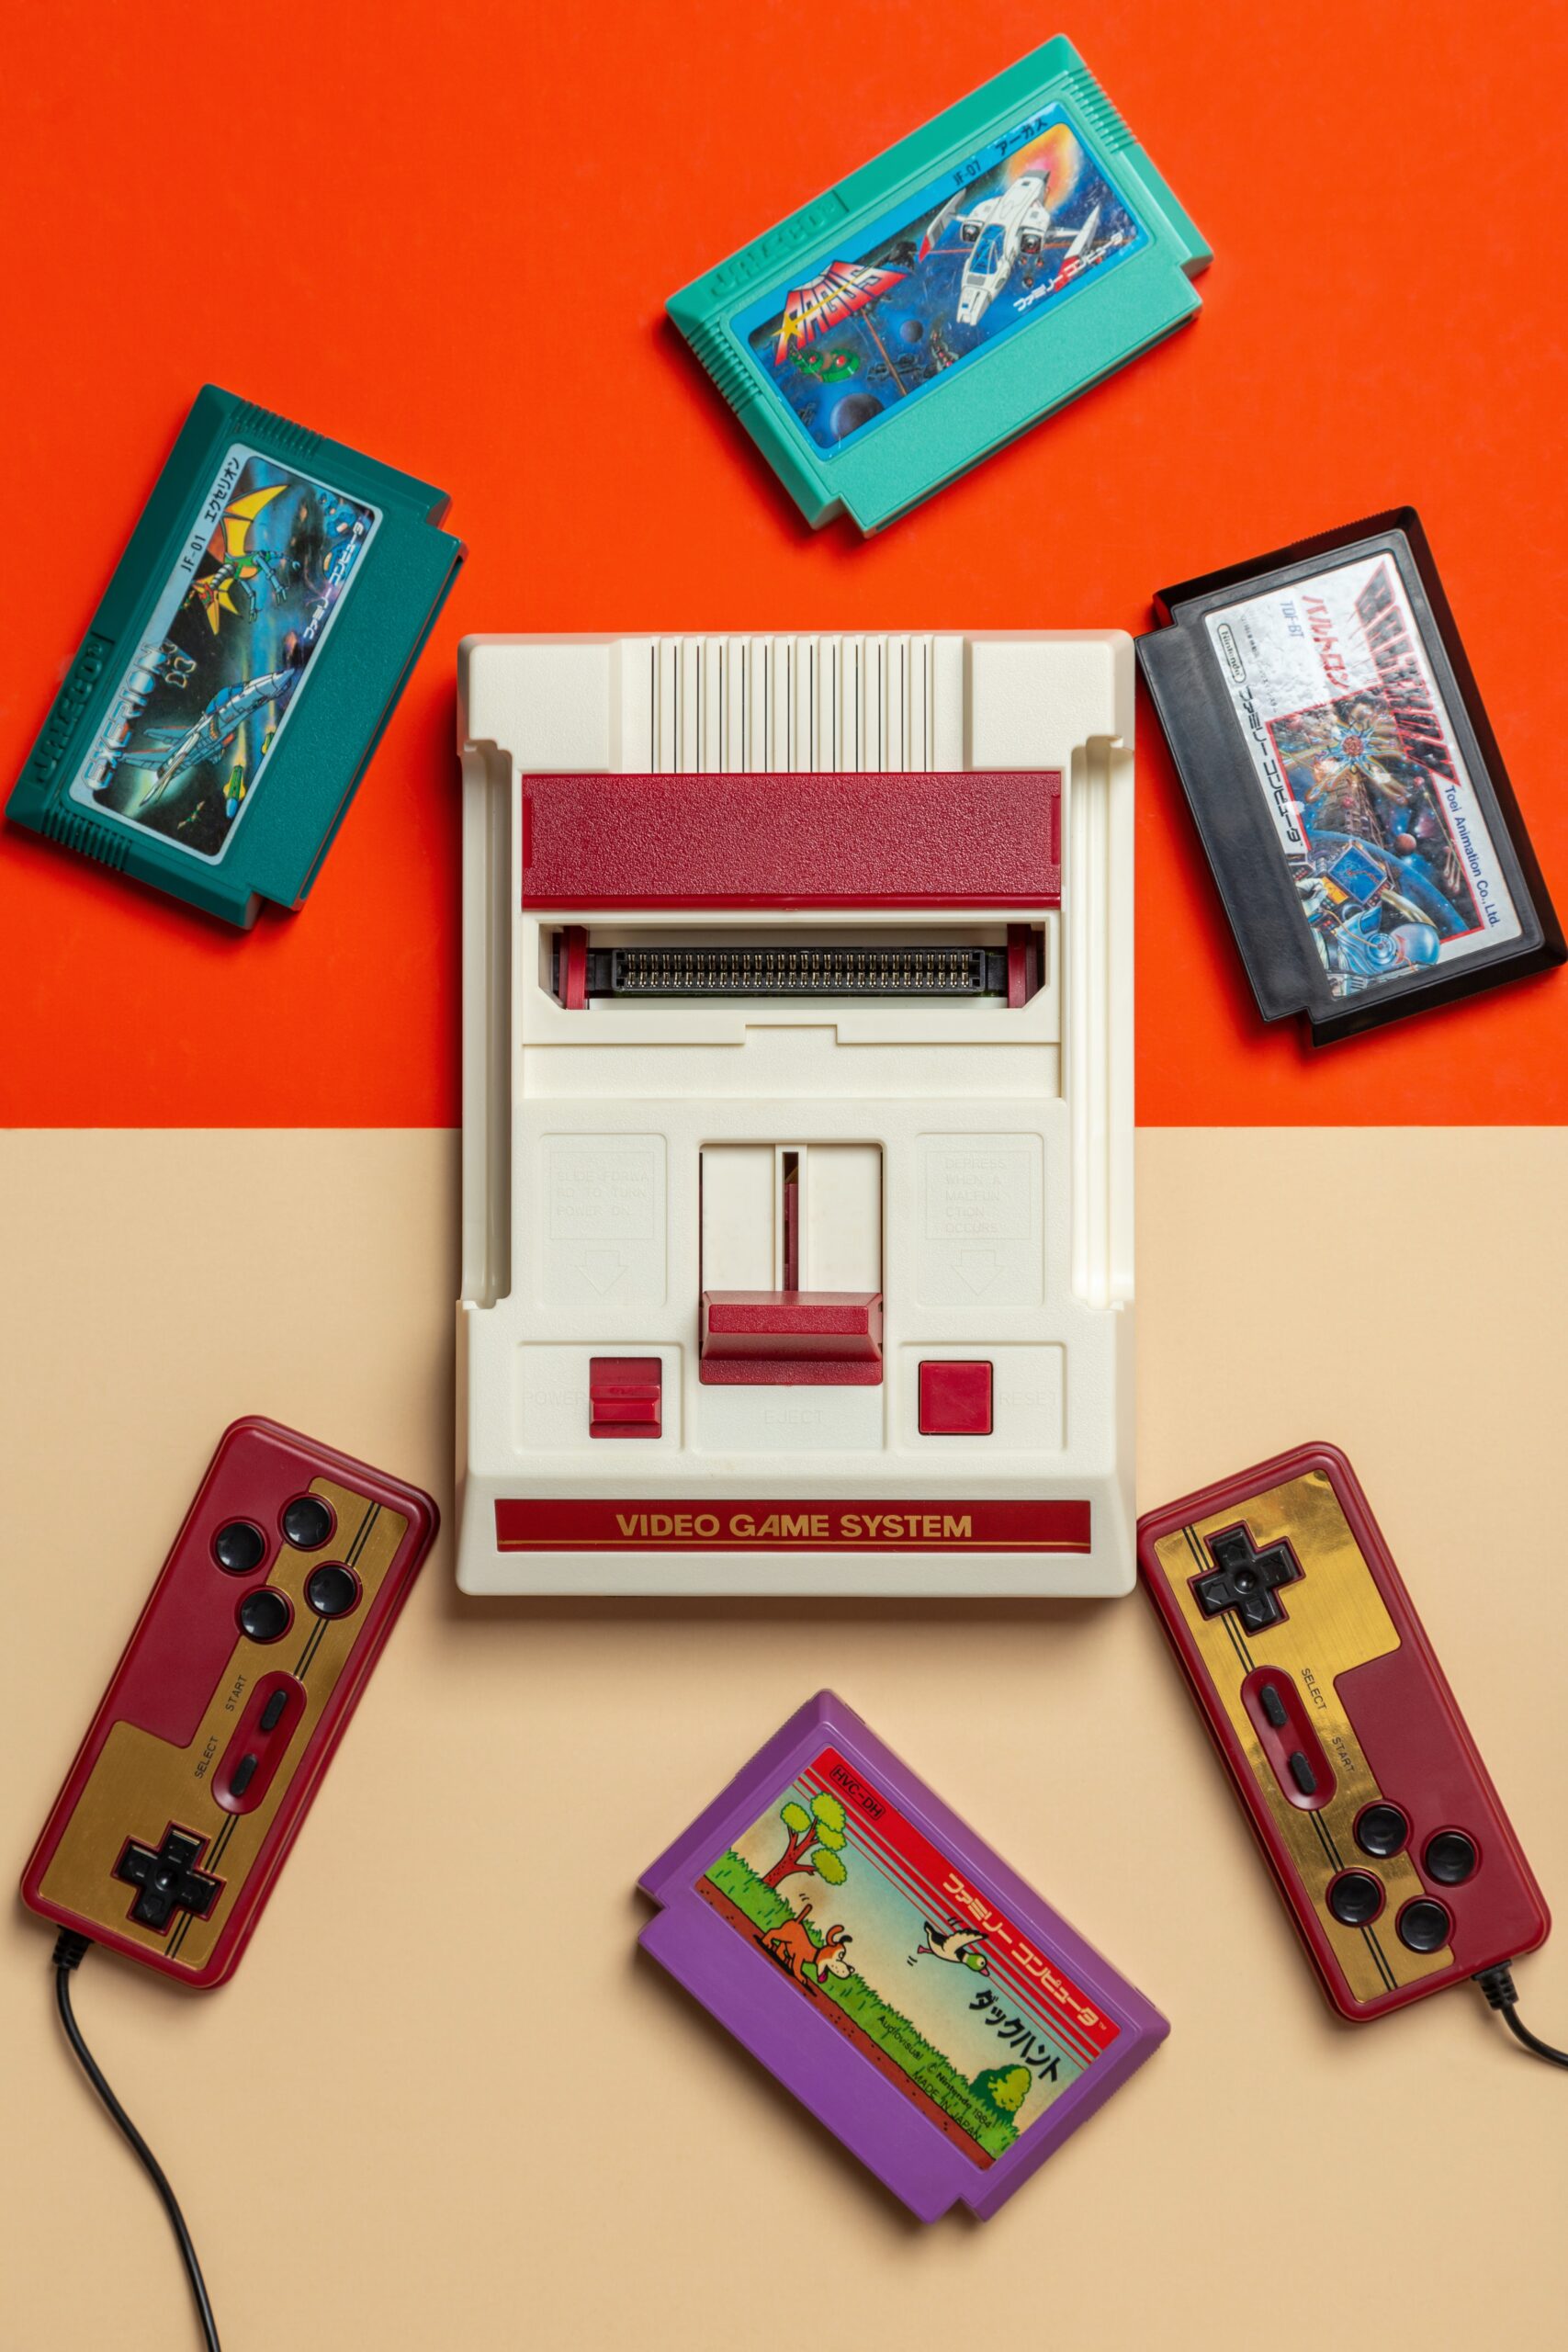 A Japanese Famicom console and games.